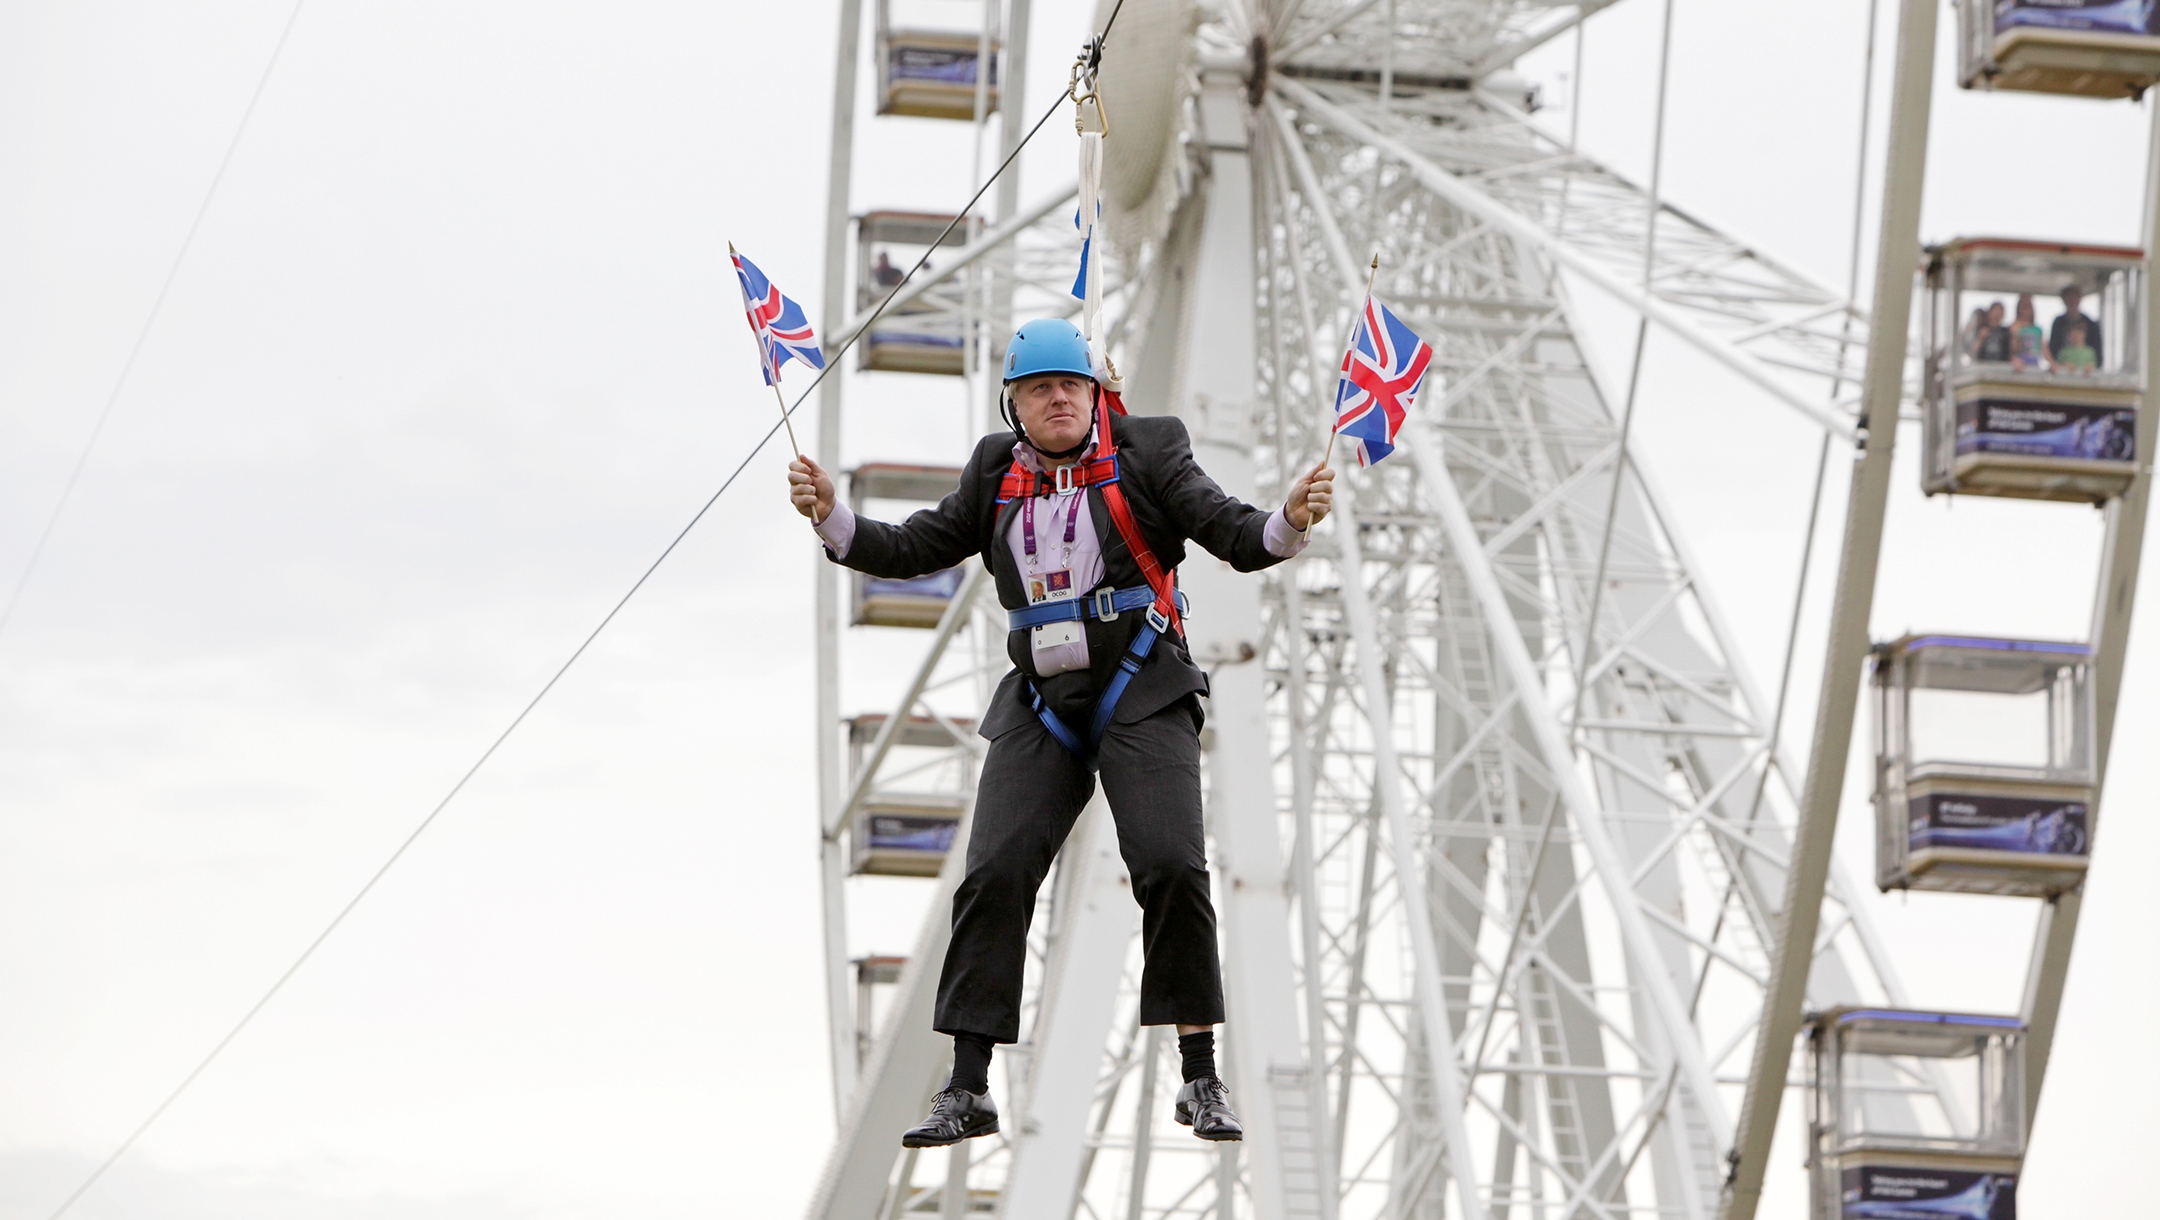 British Prime Minister-elect Boris Johnson waiting to glide on a zip line onto the Olympic Park in London, the United Kingdom, on August 1, 2012. (Barcroft Media / Barcroft Media via Getty Images)